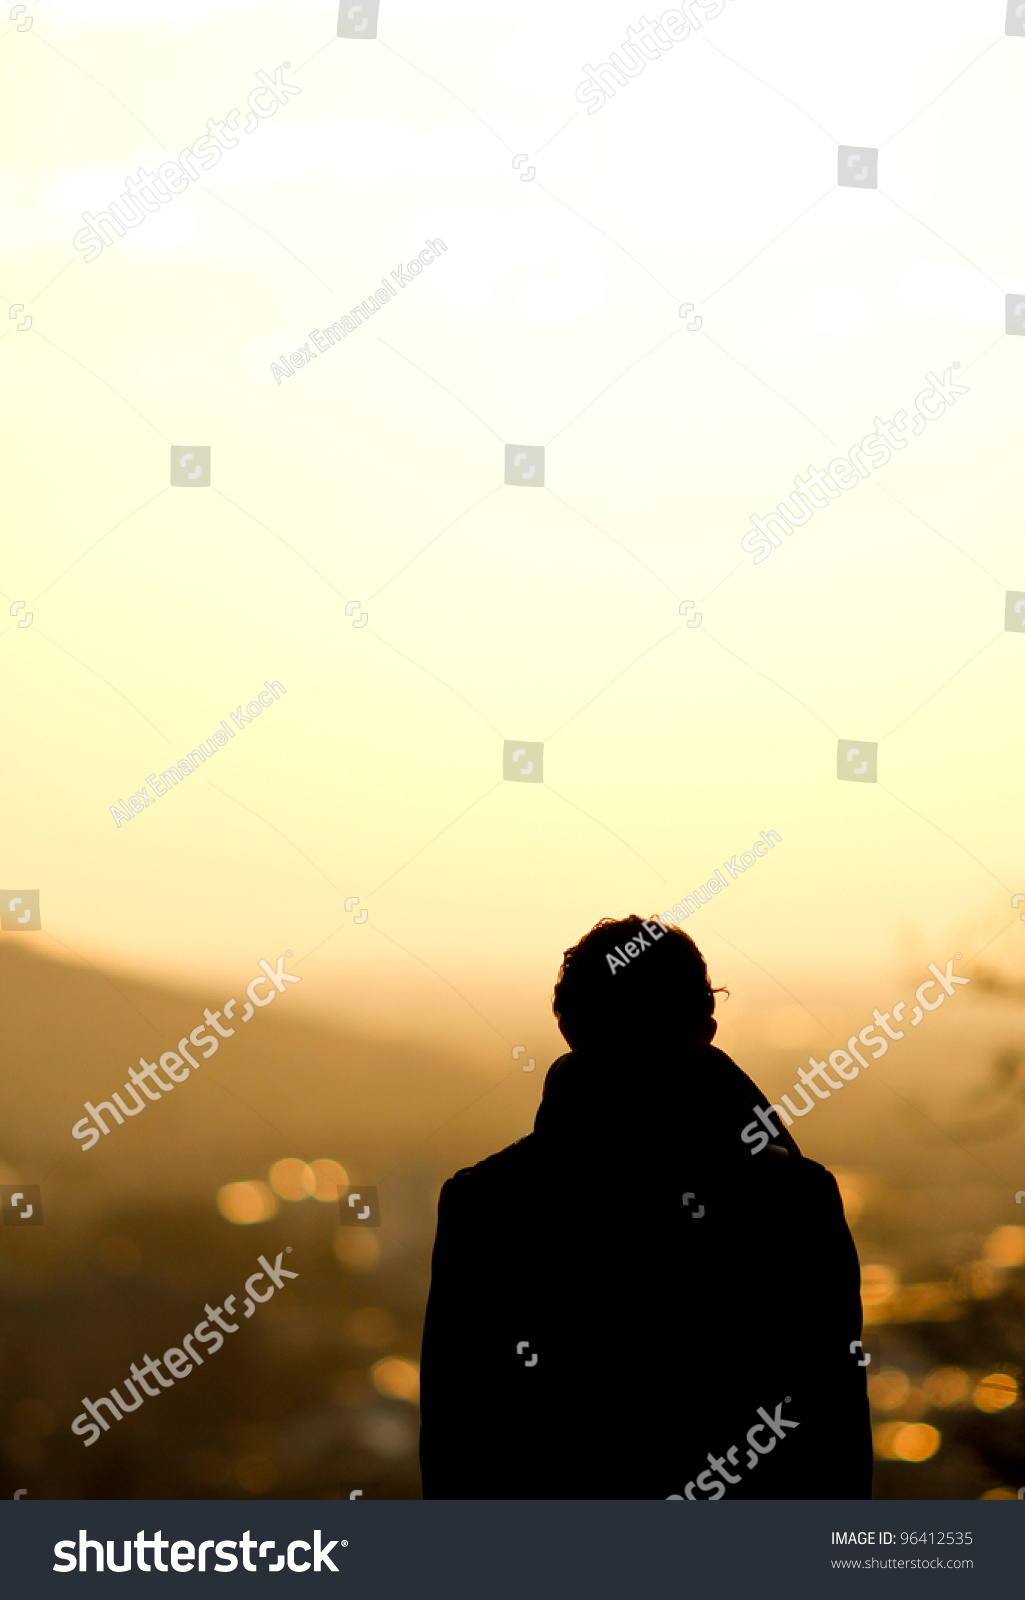 silhouette of man standing over freiburg in sunset #96412535